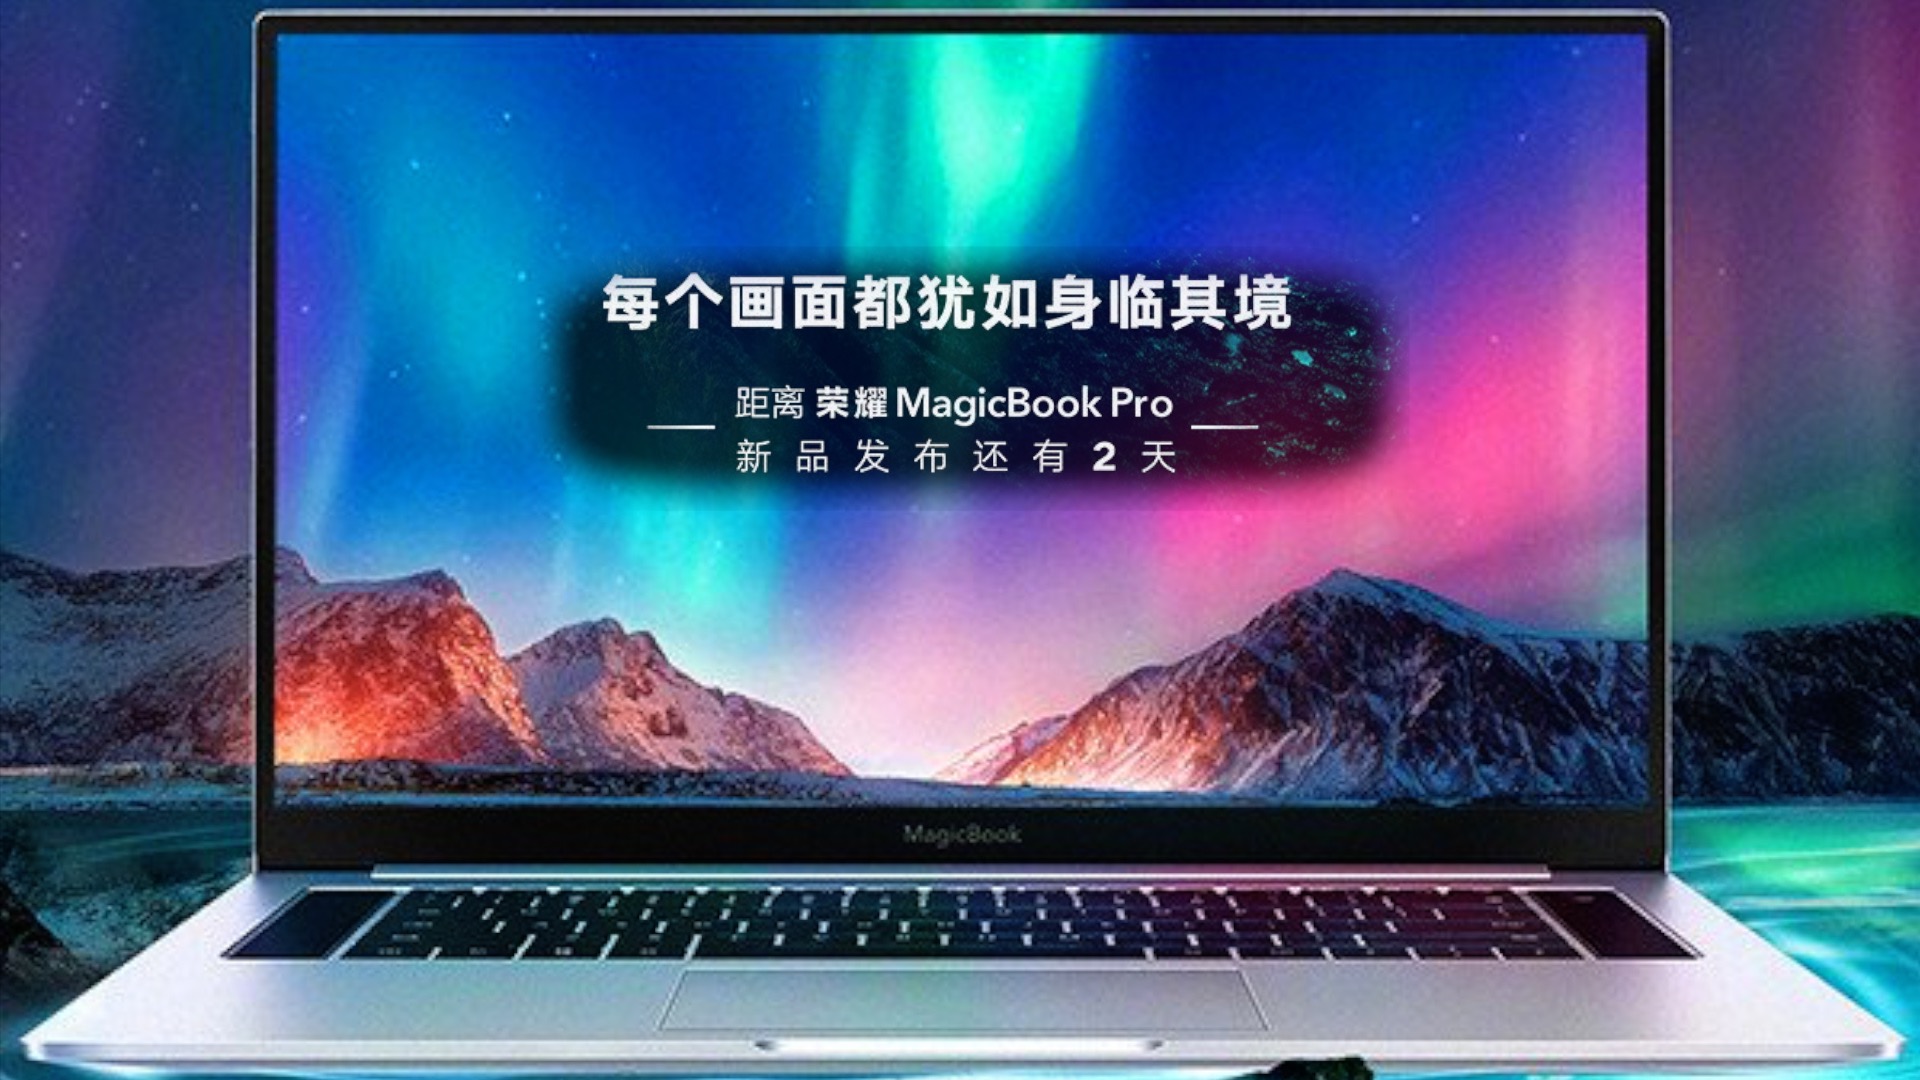 Pc manager honor magicbook. Ноутбук Honor MAGICBOOK Pro. Honor MAGICBOOK 16 Pro. Huawei MAGICBOOK Pro. Huawei MAGICBOOK X Pro.